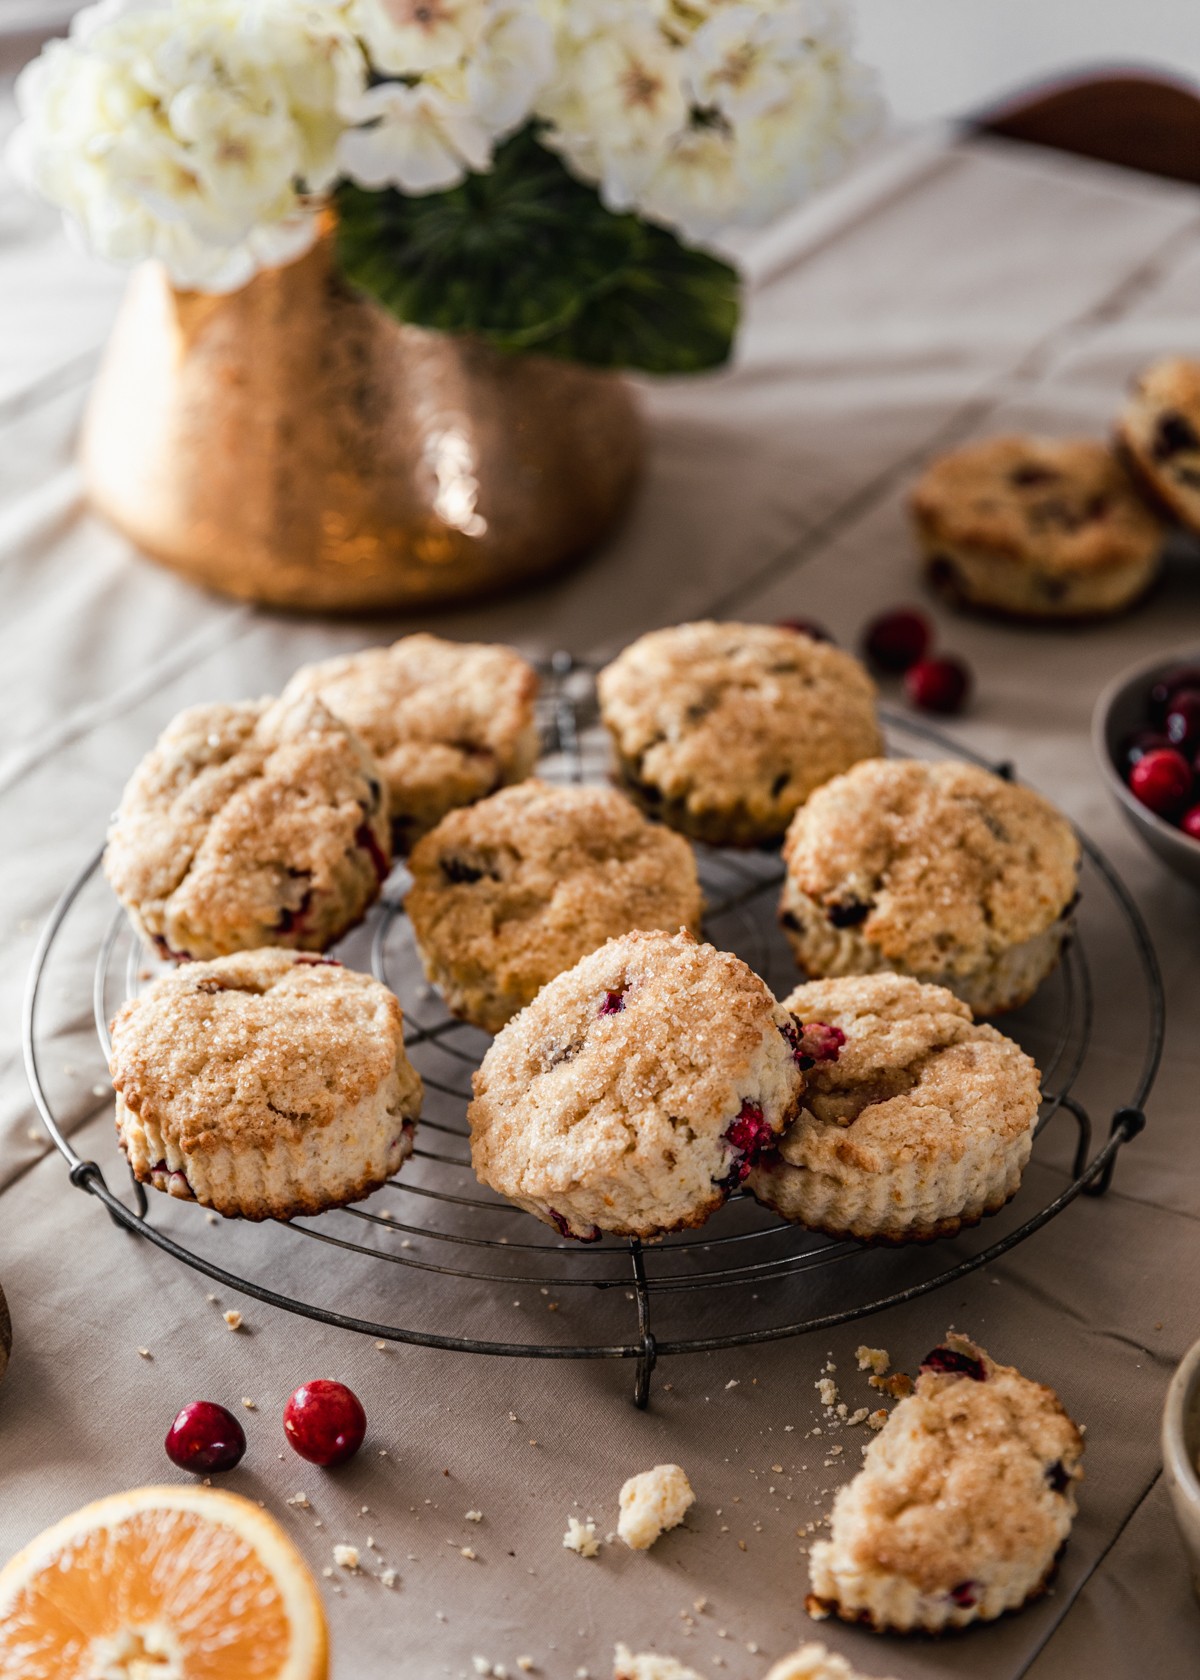 A side image of a metal circle cooling rack topped with cranberry orange scones on a beige table cloth next to a crumbled scone, half an orange, a bowl of cranberries, and a gold pot with white hydrangeas.